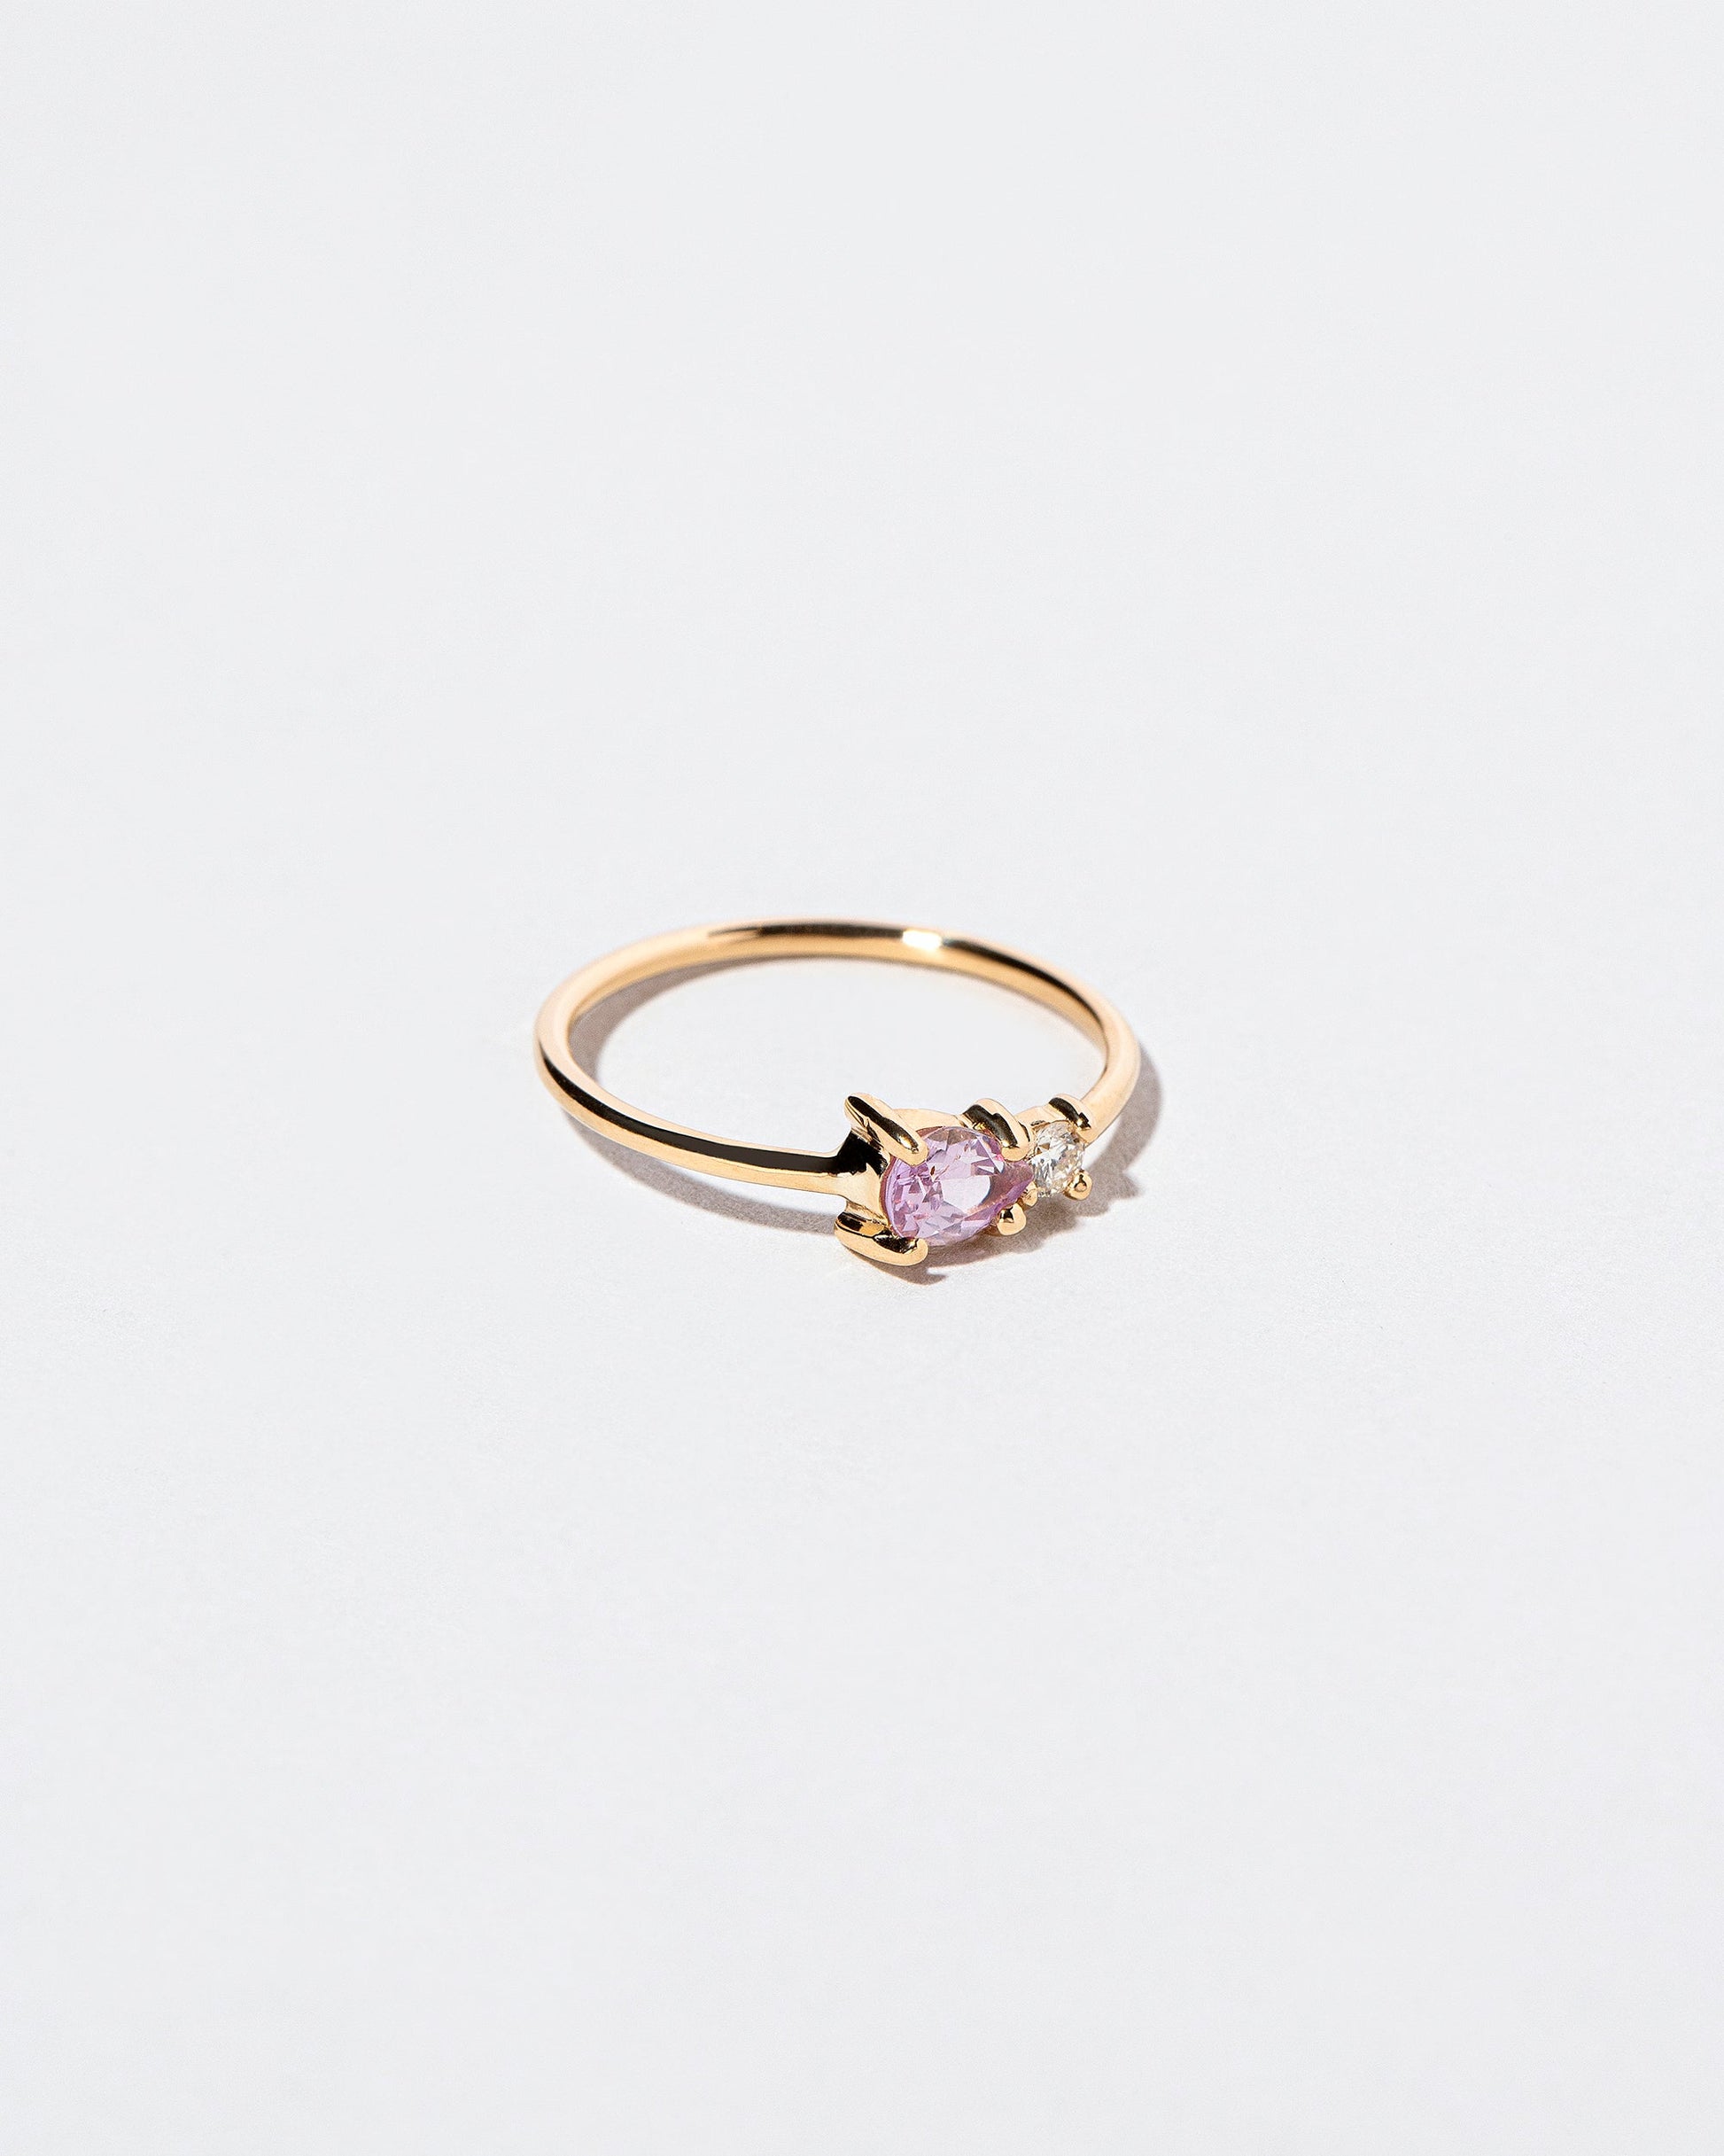 View from the side of the Pink Sapphire Teardrop Ring on light color background.